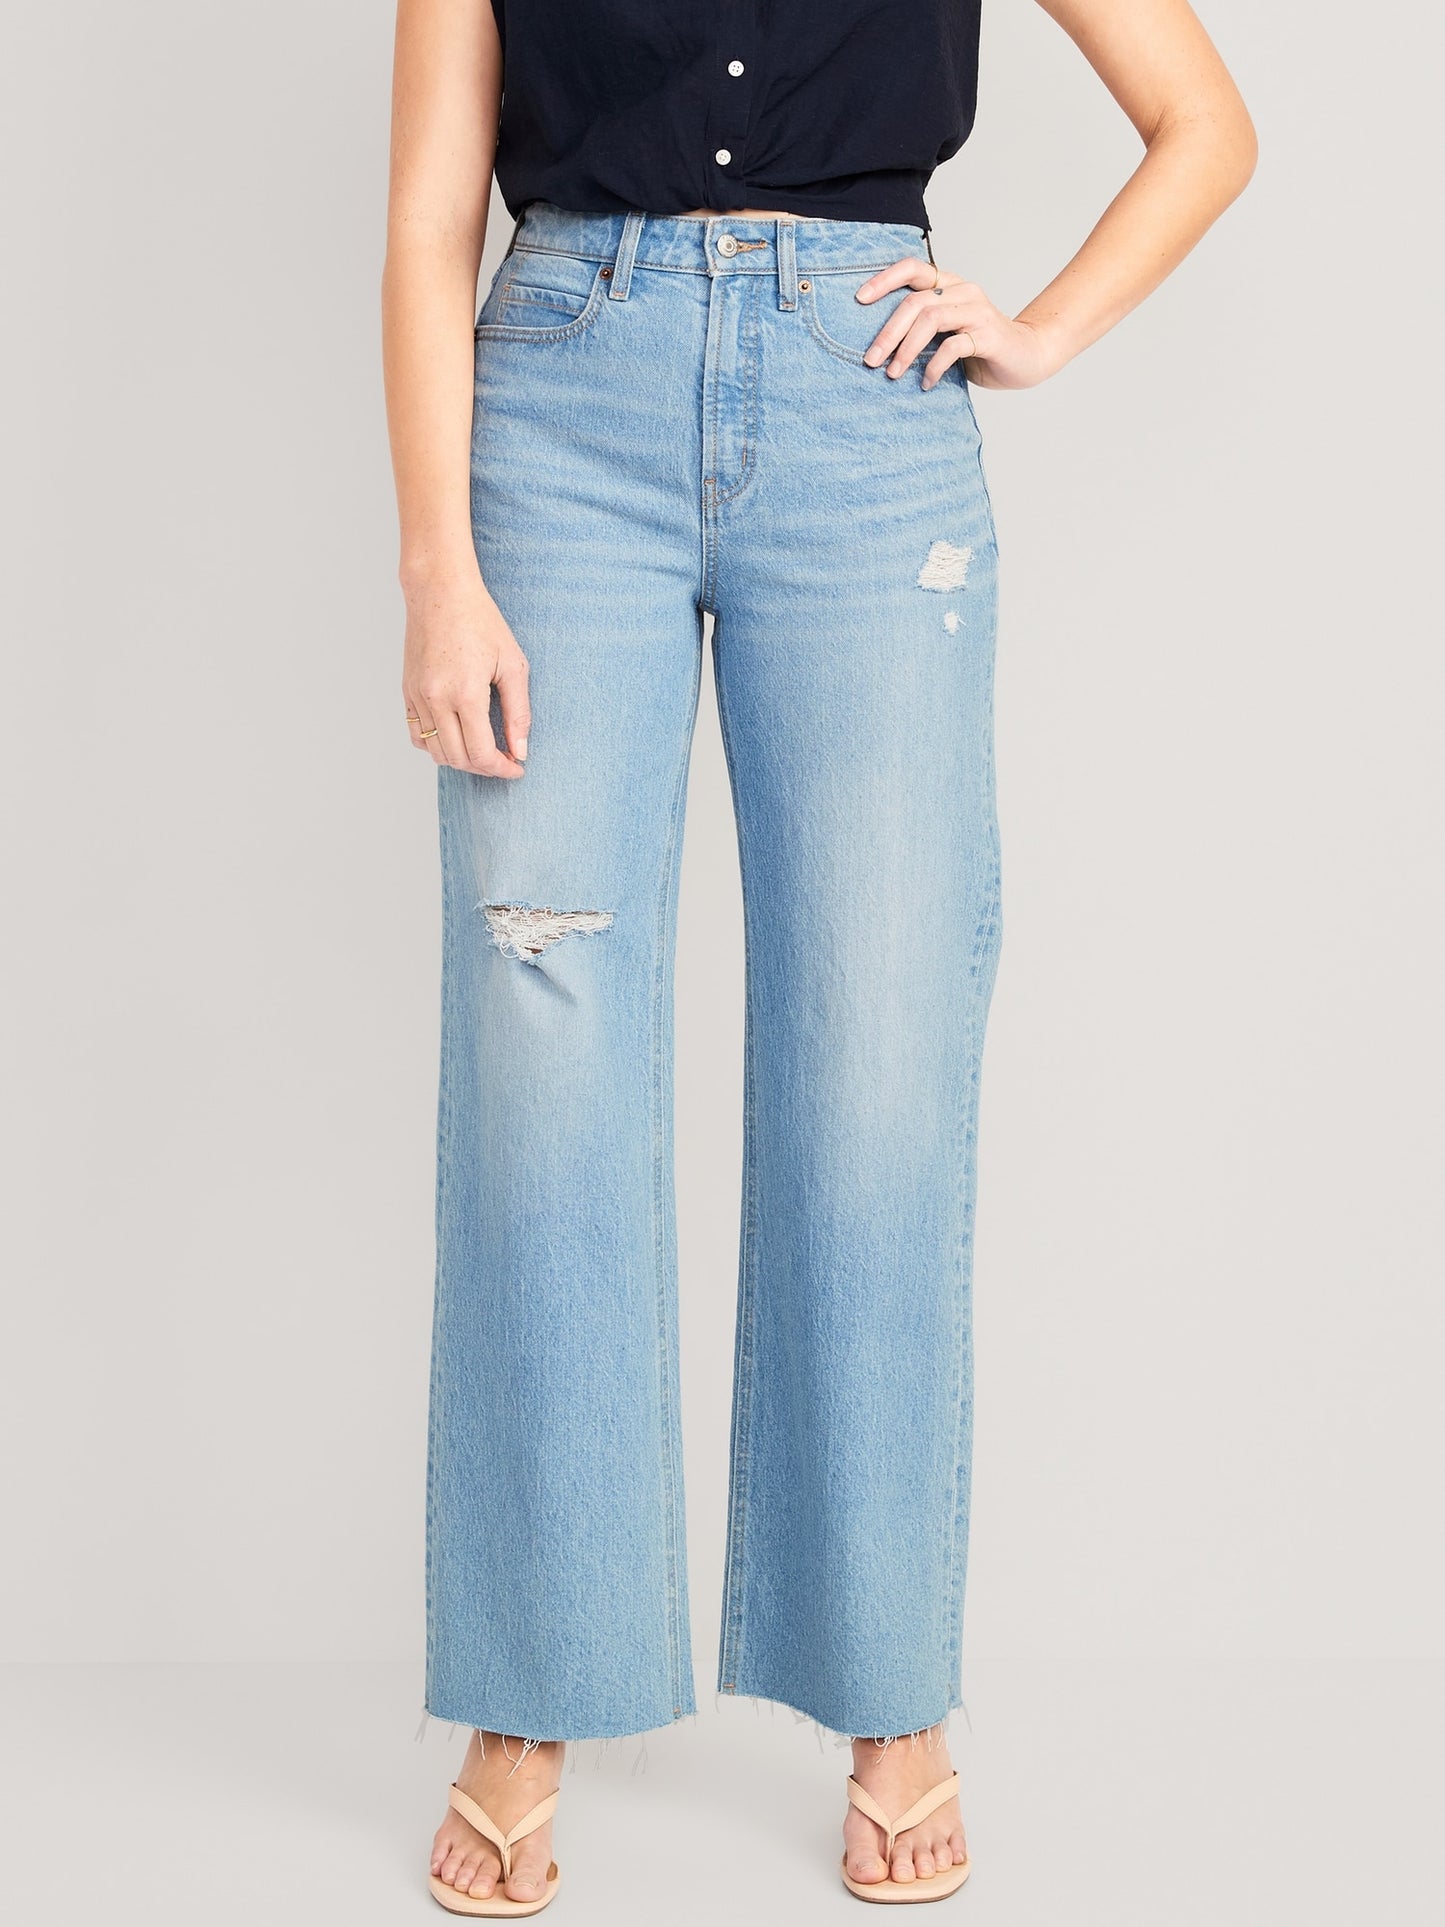 Curvy Extra High-Waisted Cut-Off Wide-Leg Jeans for Women